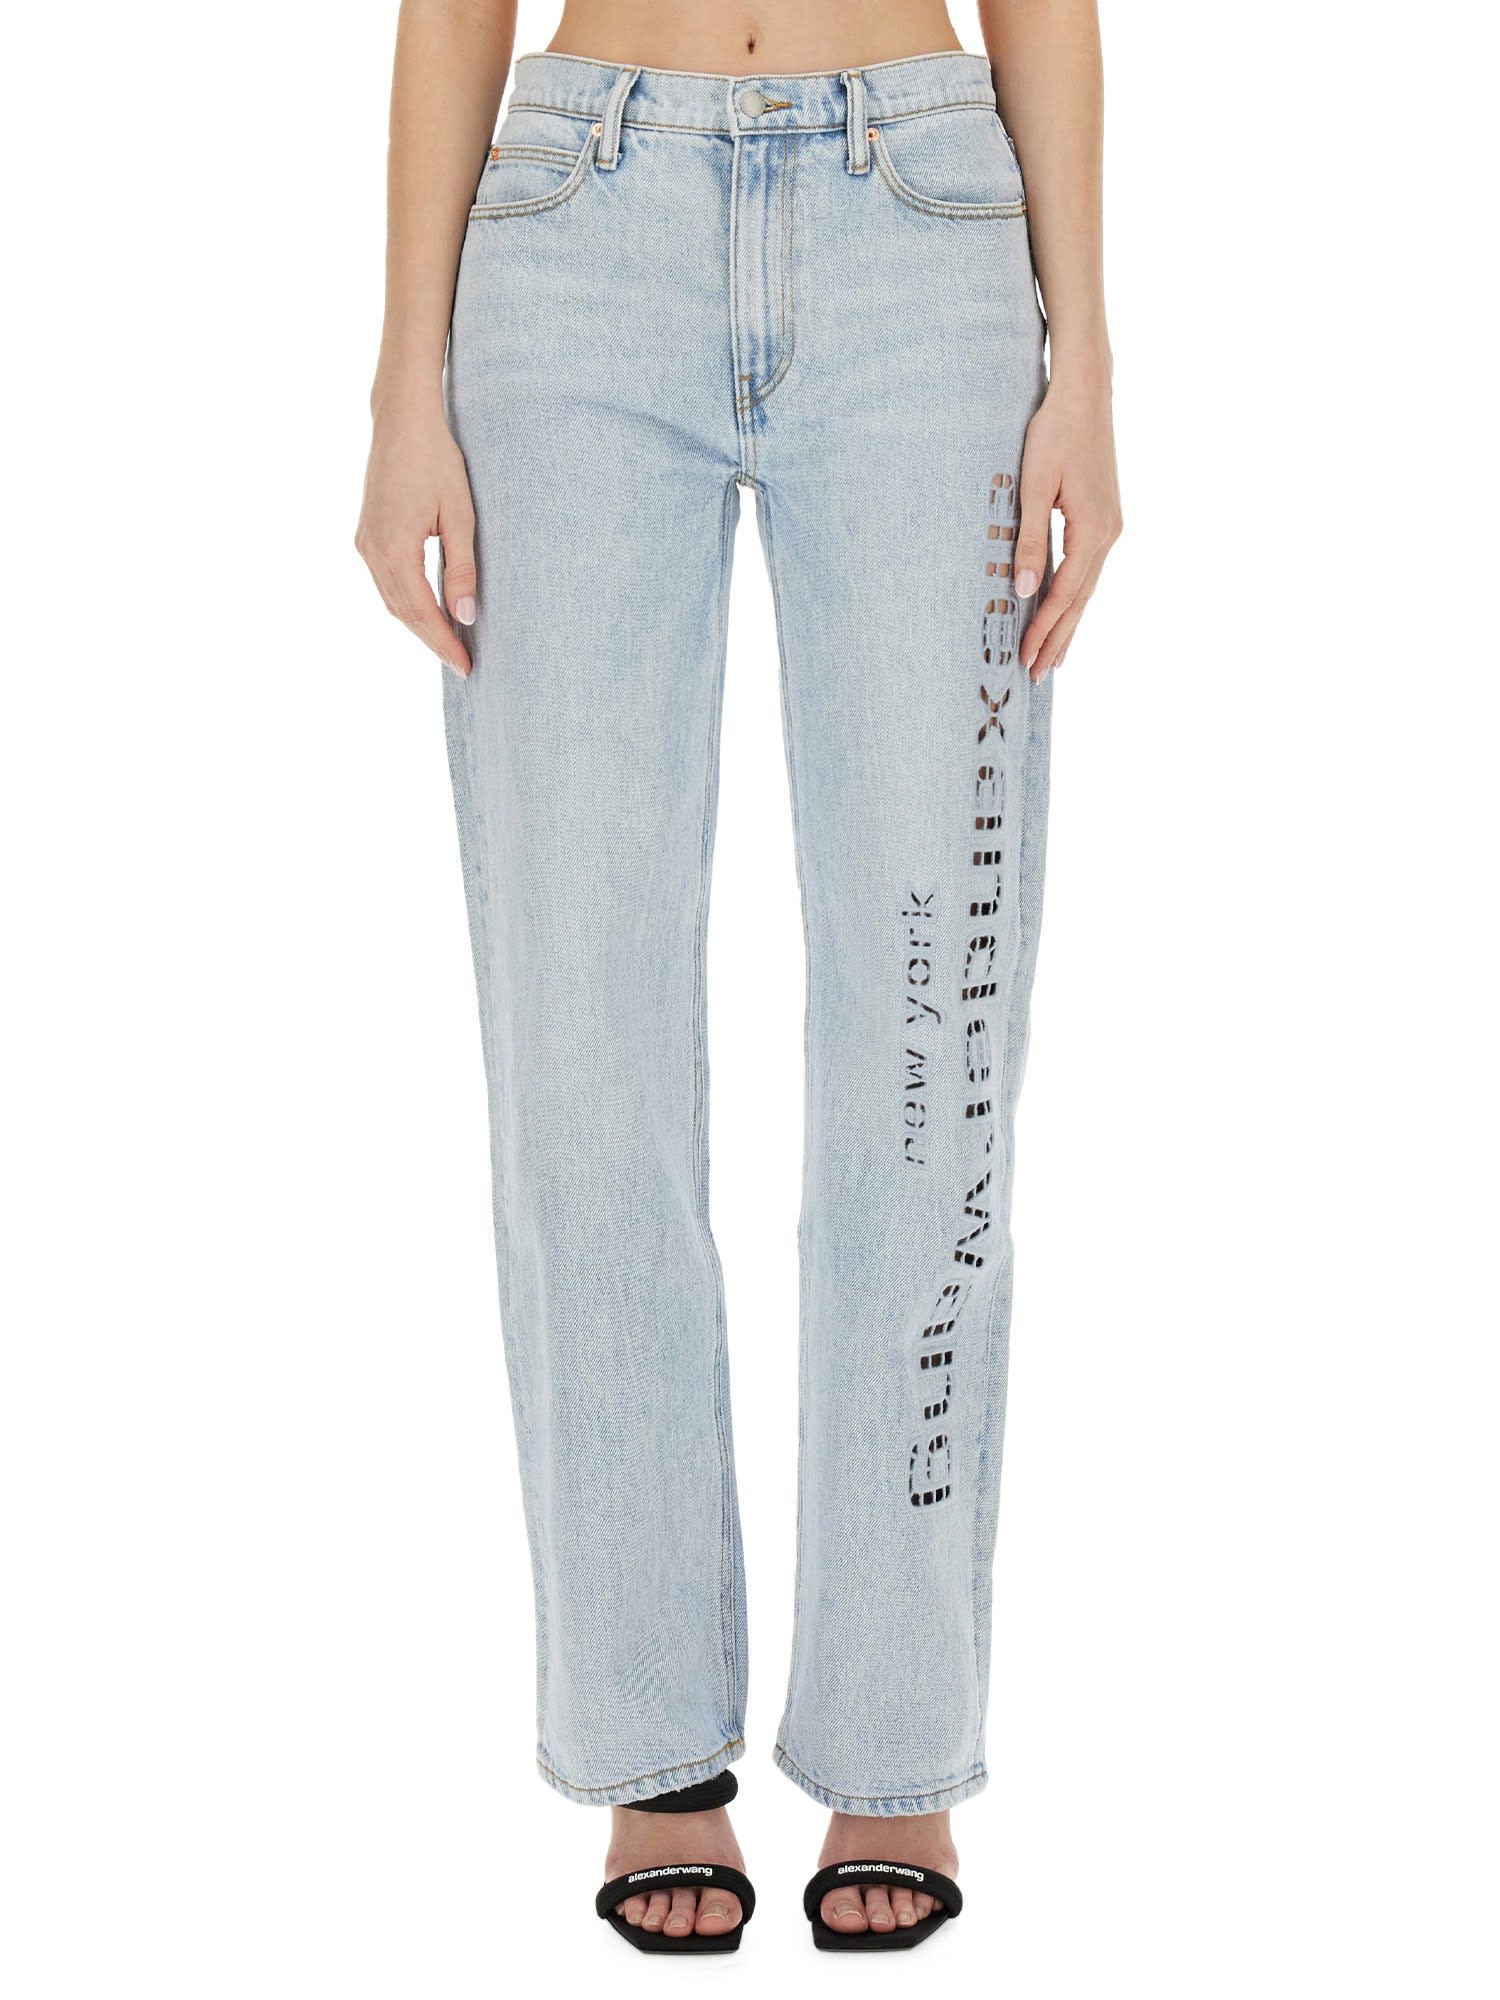 ALEXANDER WANG T EZ LOGO JEANS AND CUT-OUT